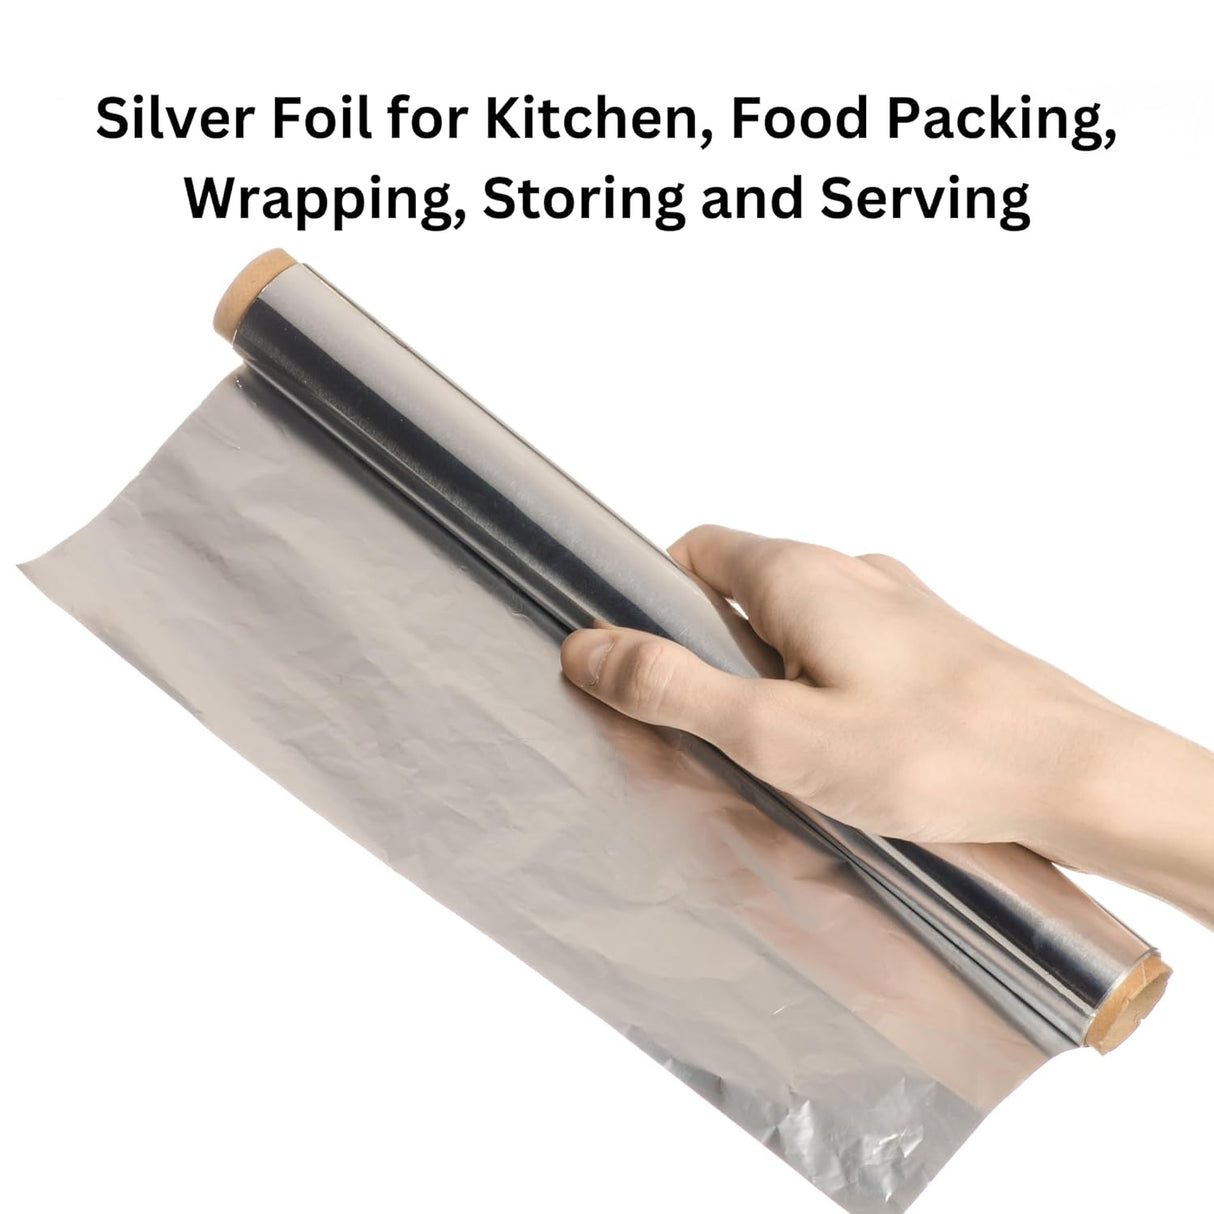 Singhal Aluminum Foil 27 Meters, 11microns | Aluminium Silver Foil for Kitchen, Food Packing, Wrapping, Storing and Serving (9 Mtr x Pack of 3)